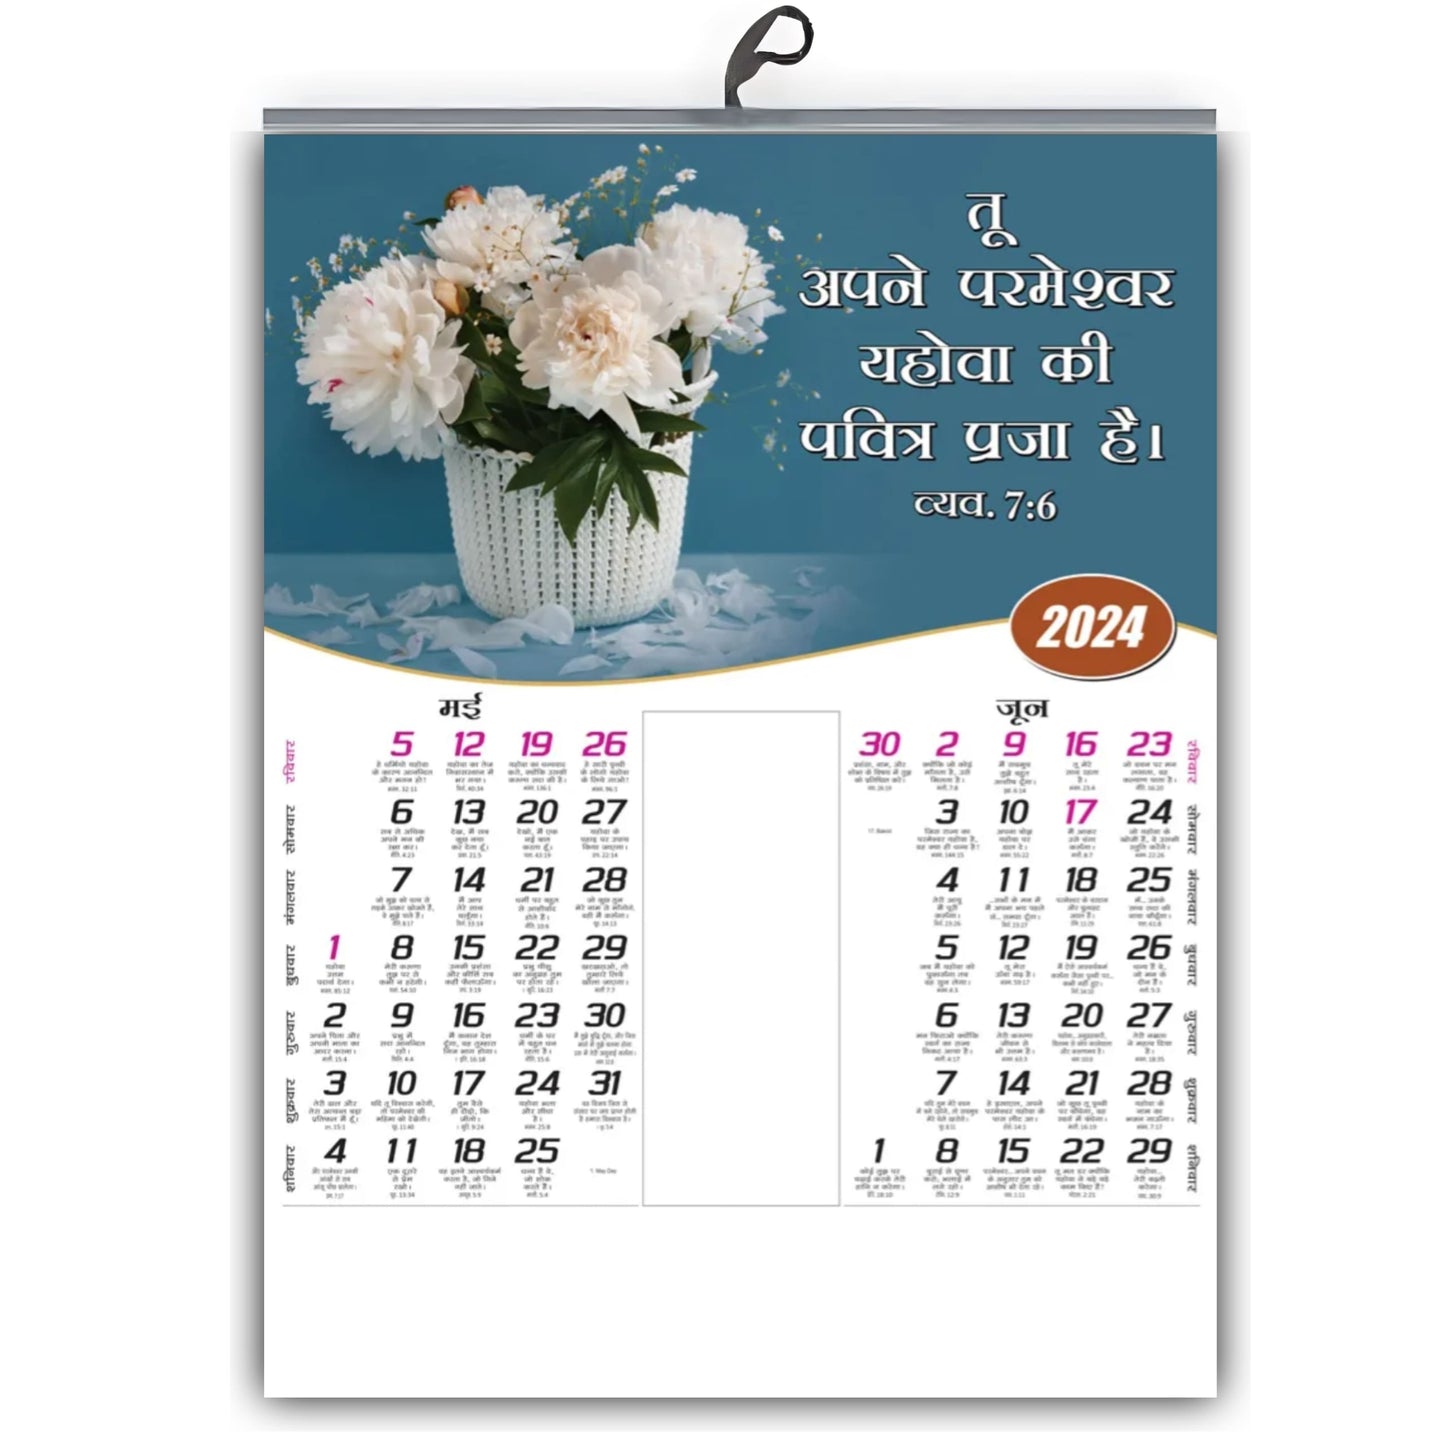 2024 Bible Verse Hindi Wall Calendar - Beautiful Flowers & Baby with Bible Promise Words